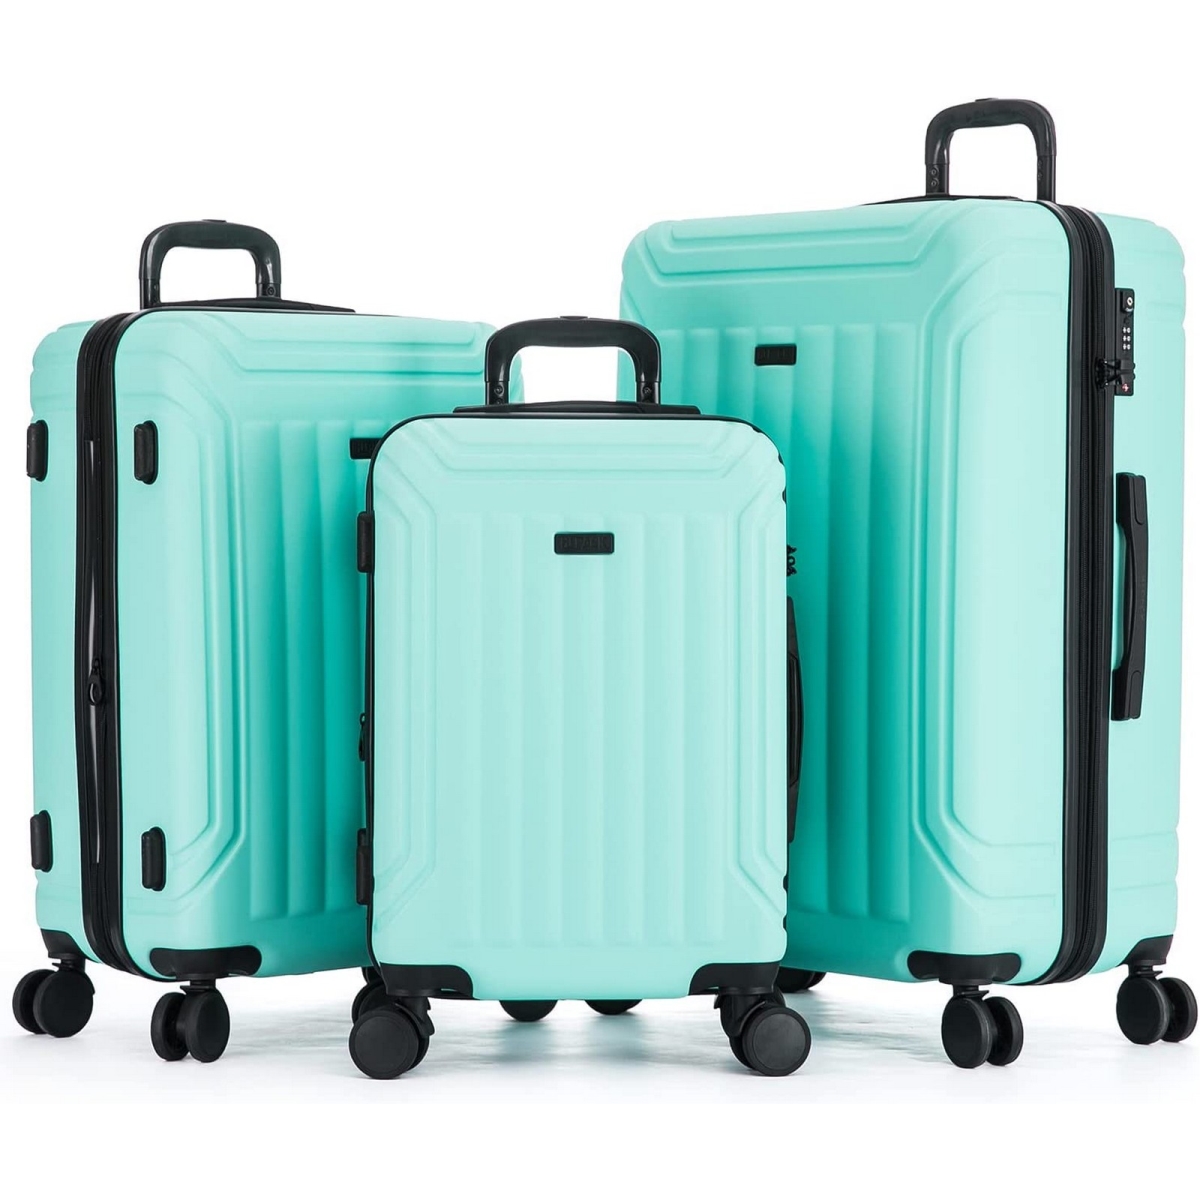 Picture of Hipack 25HP2107-MINT Hipack Rover   Generation Hardside 3-Piece Luggage Set - Mint